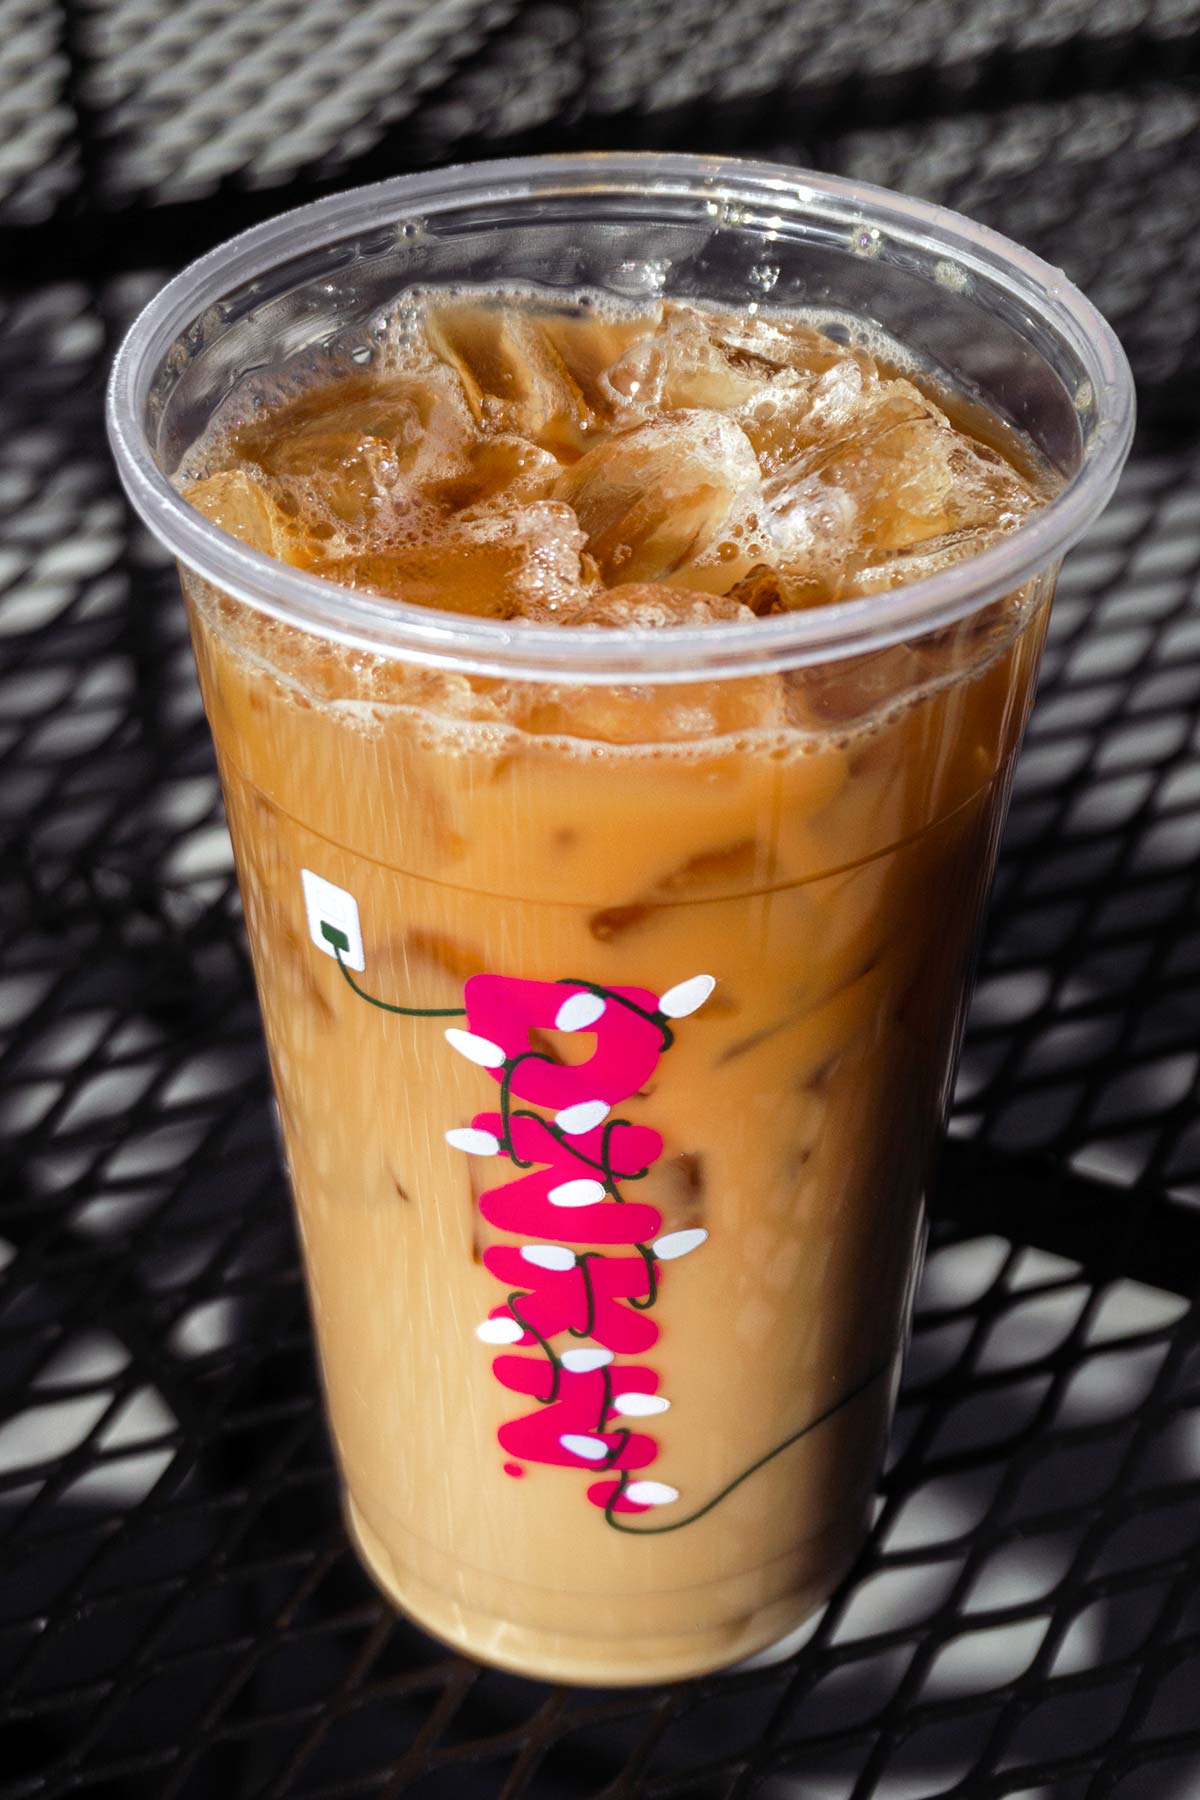 Dunkin' "The Charli" drink in a holiday Dunkin' cup.